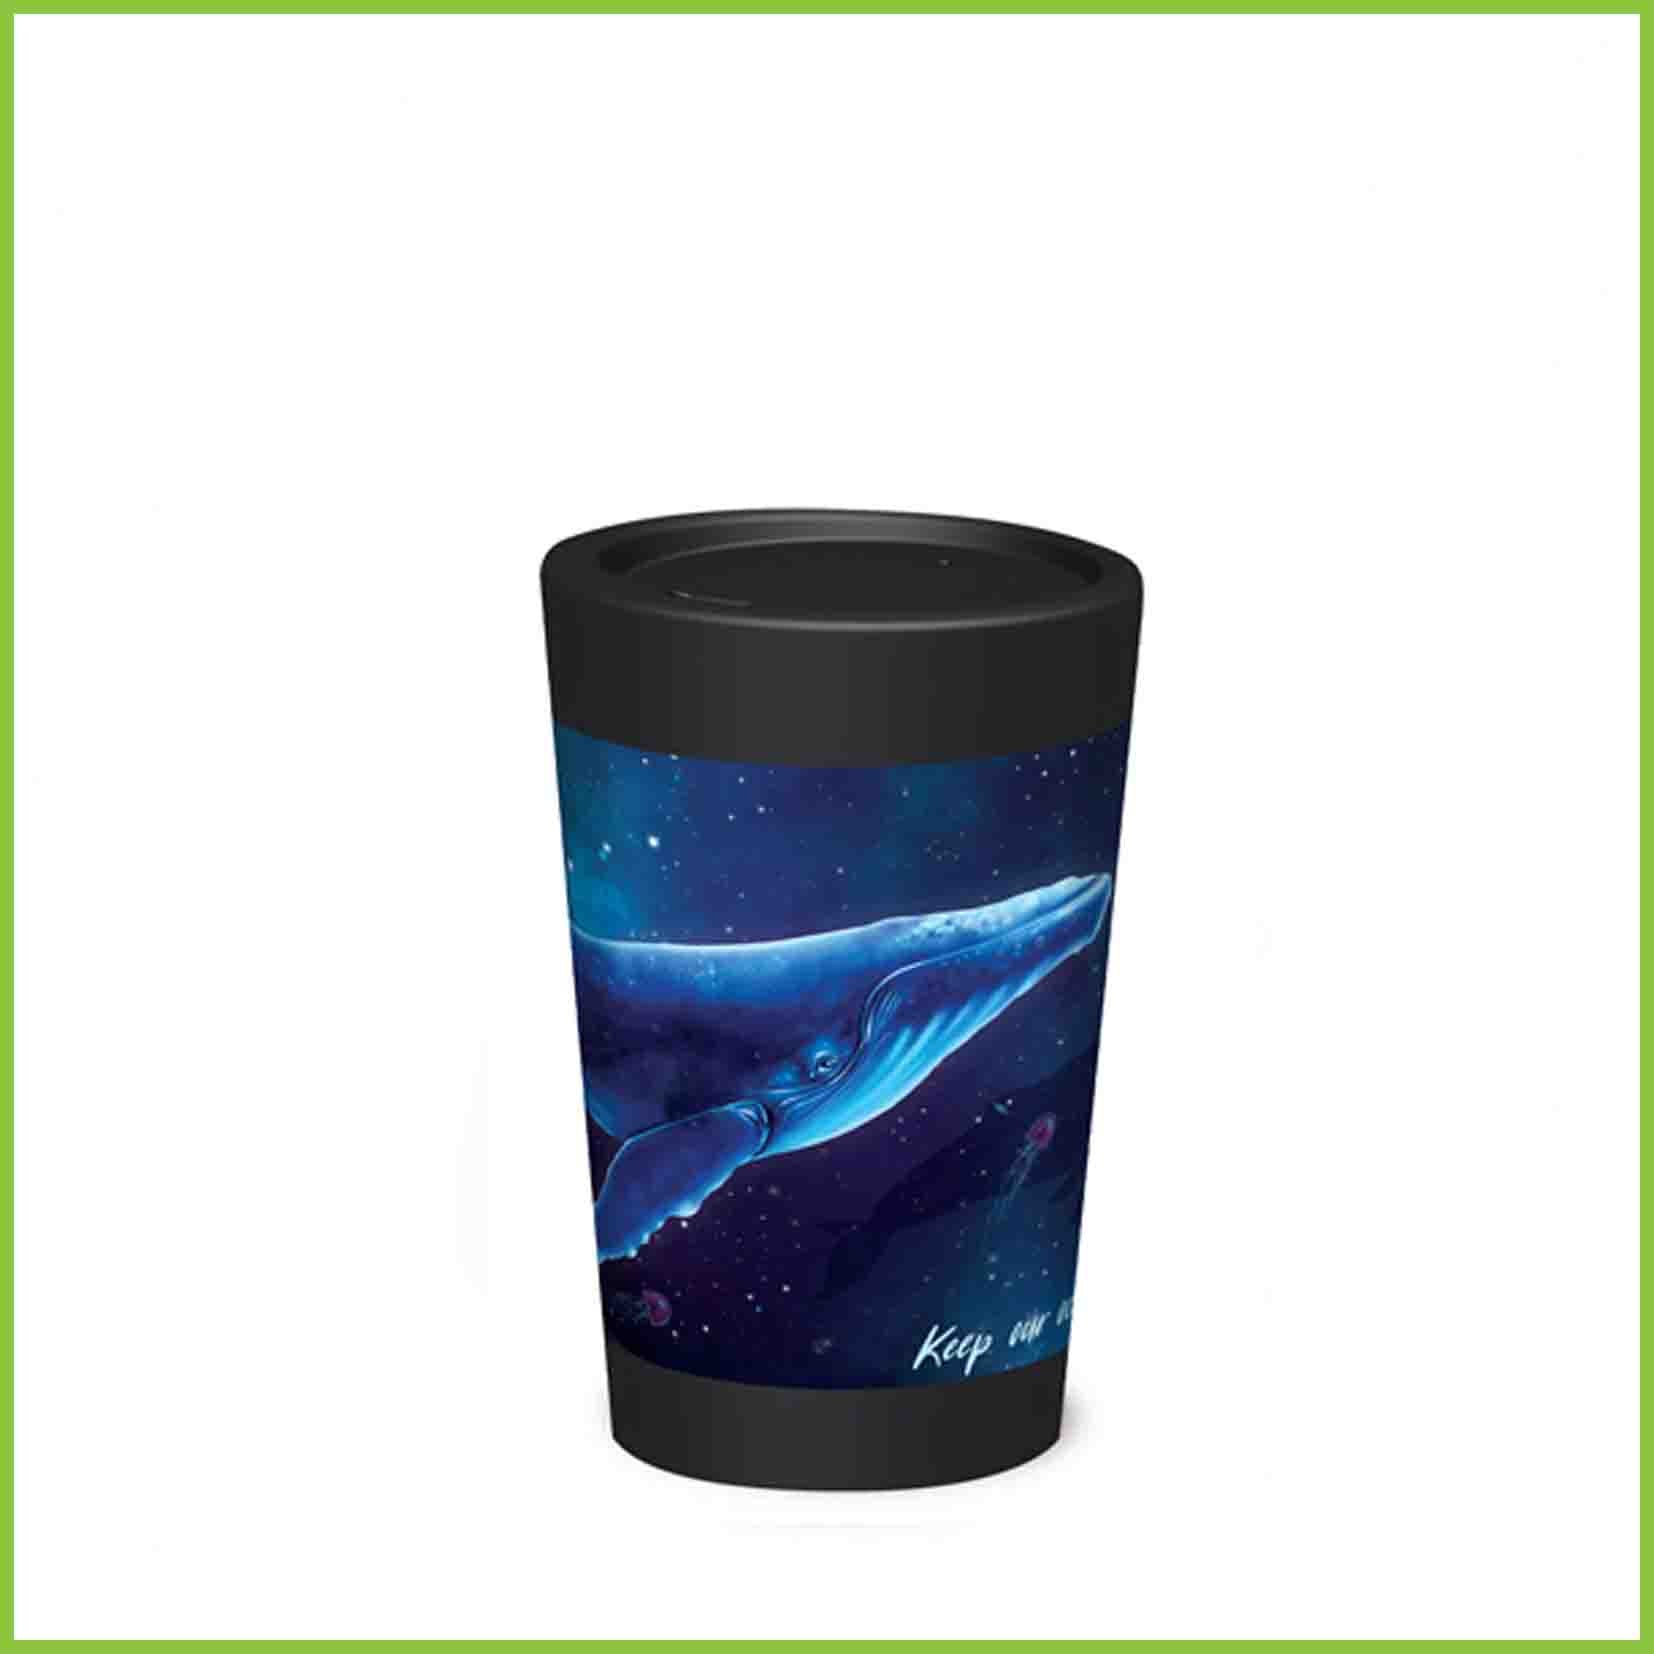 A lightweight reusable cup from CuppaCoffeeCup with a Humpback Whale design.